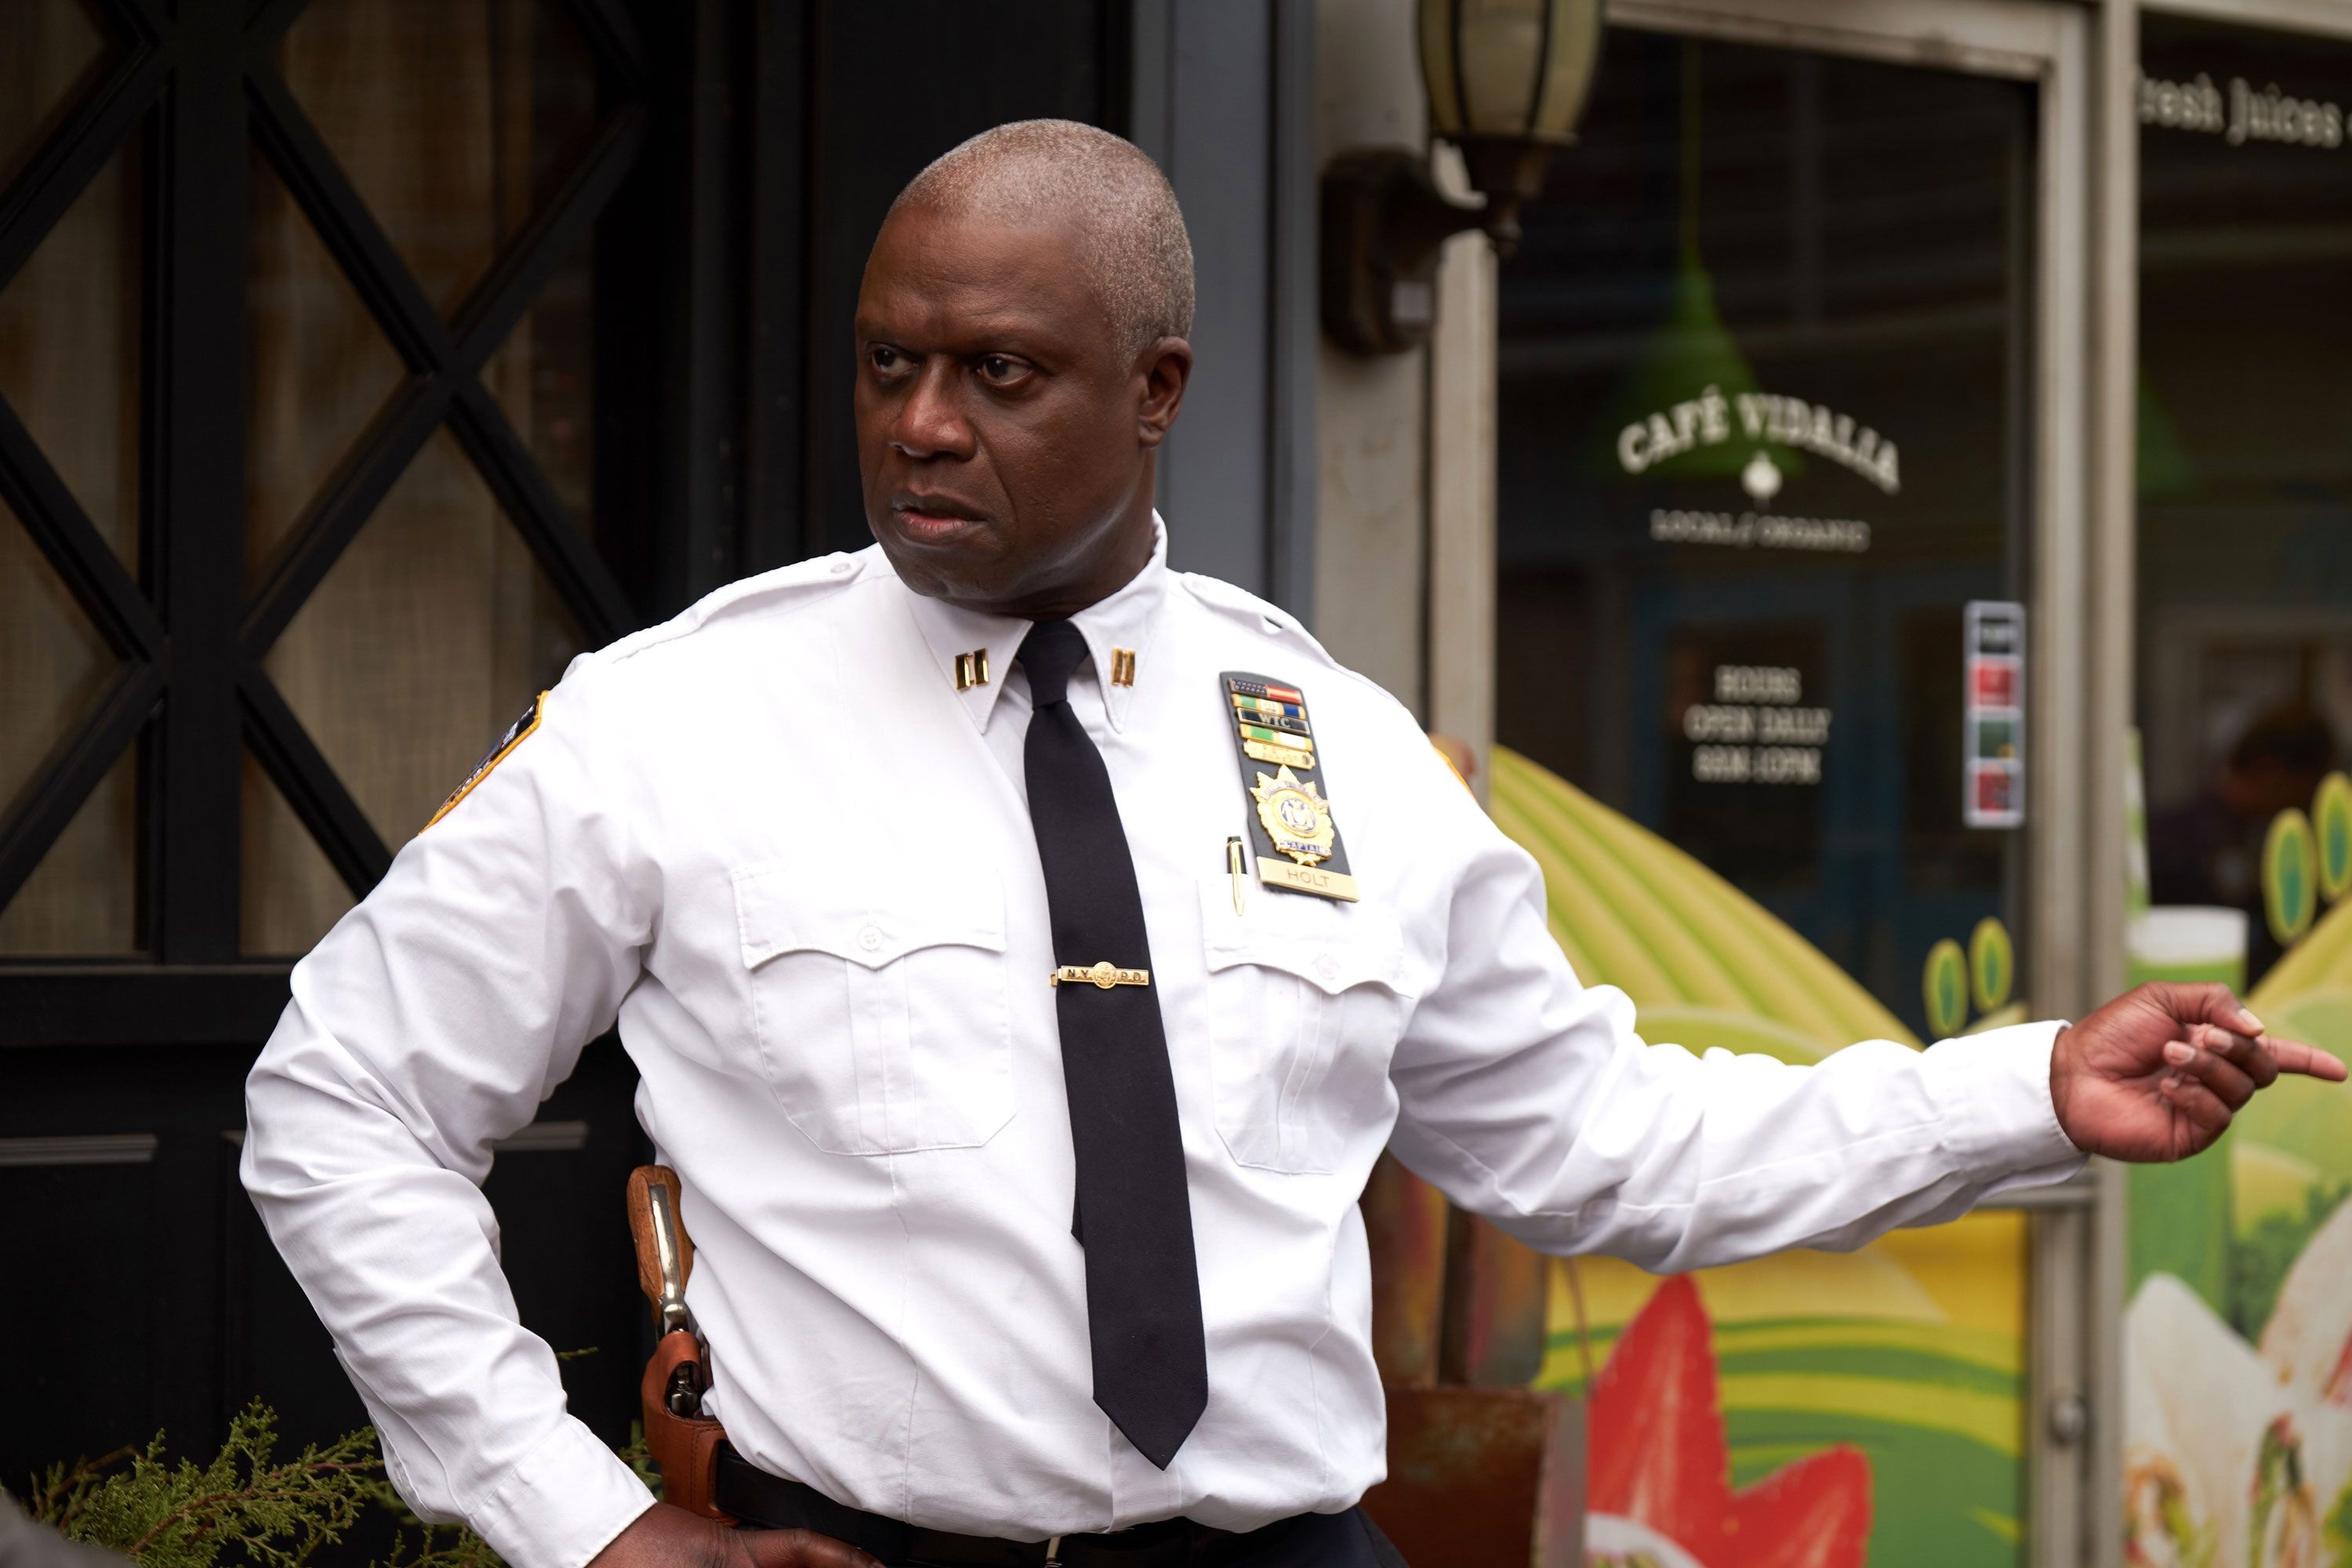 Brooklyn Nine-Nine (TV Series): Serious and stern Captain Raymond Holt, Andre Braugher. 3000x2000 HD Wallpaper.